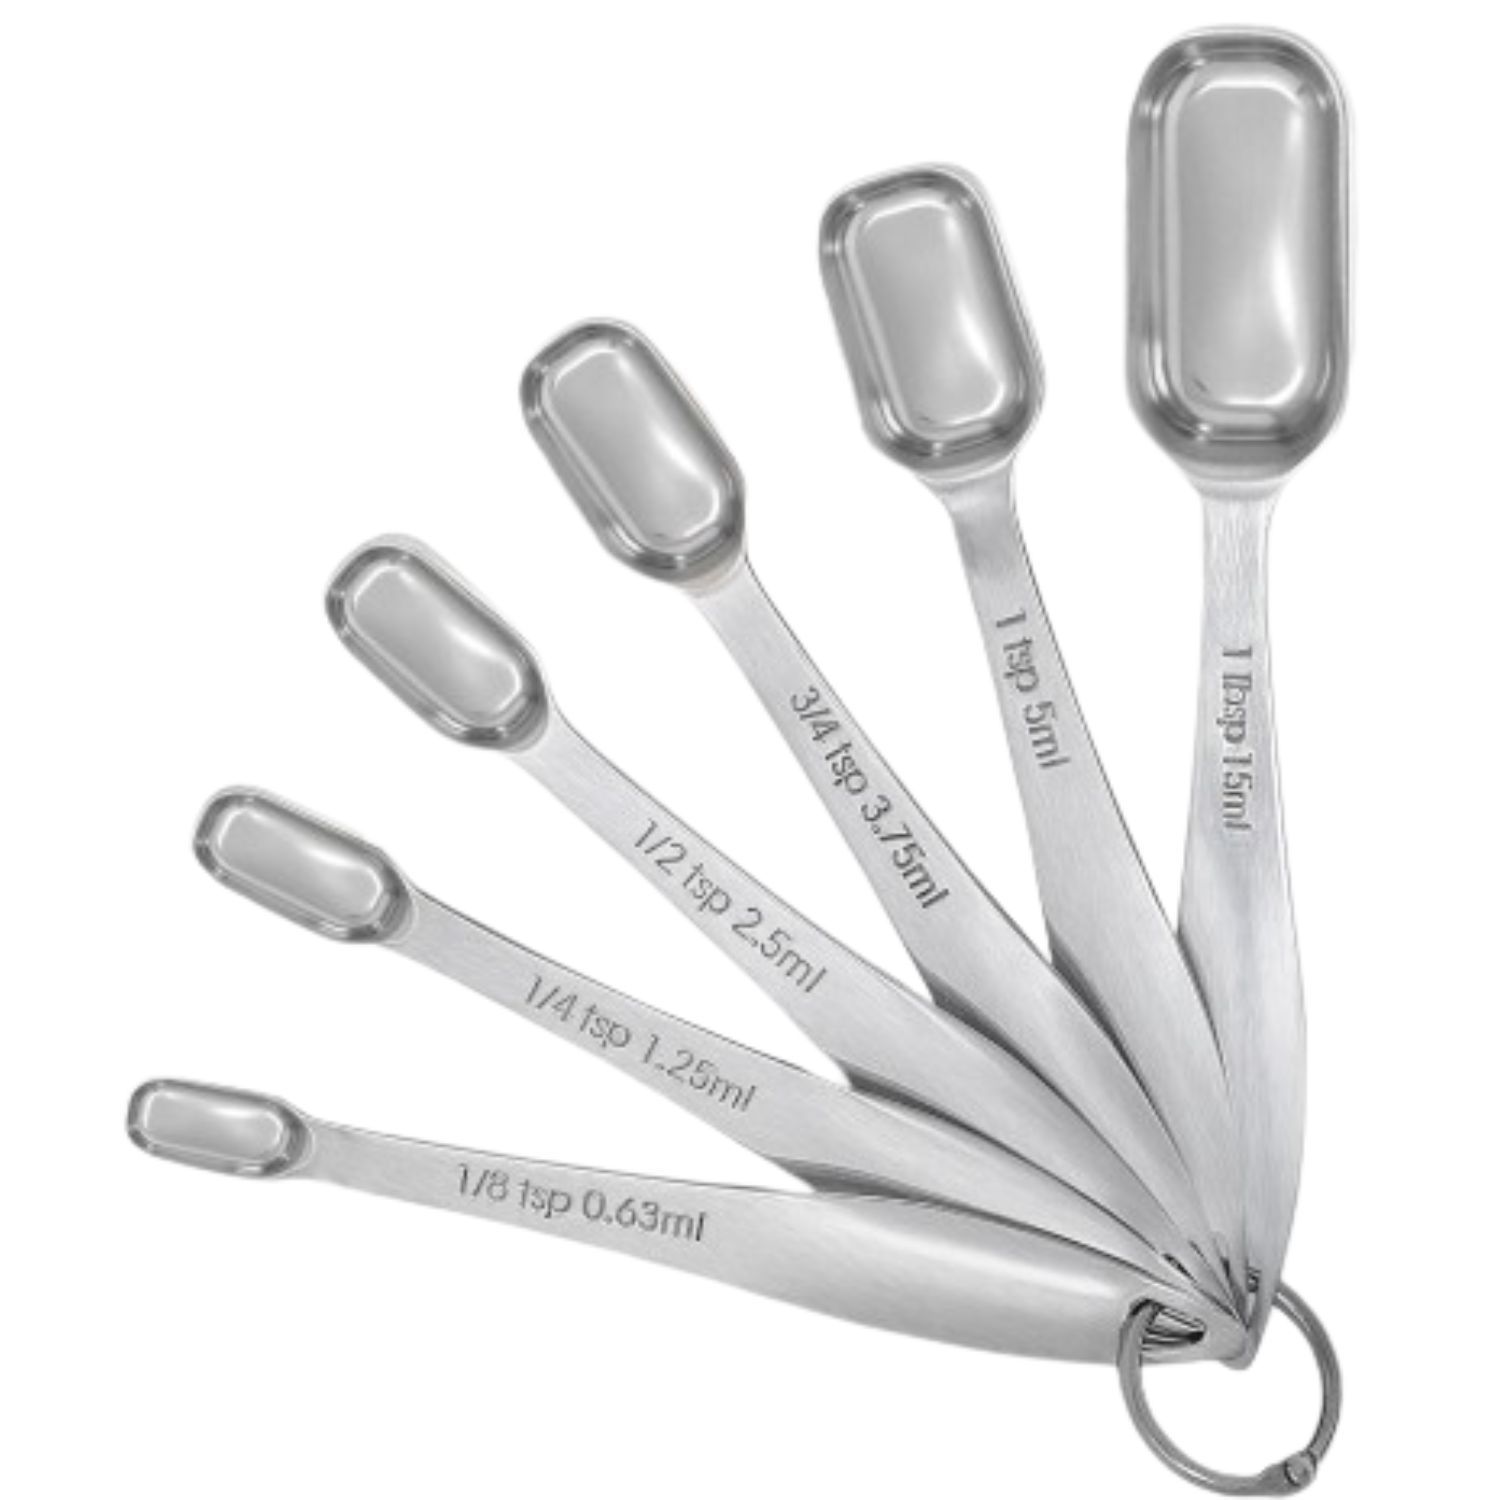 6pcs, Small Measuring Spoon Set, Stainless Steel Measuring Spoons For  Cooking And Baking, 1TBSP Teaspoon, 1TSP Teaspoon, 3/4 Teaspoon, 1/2  Teaspoon, 1